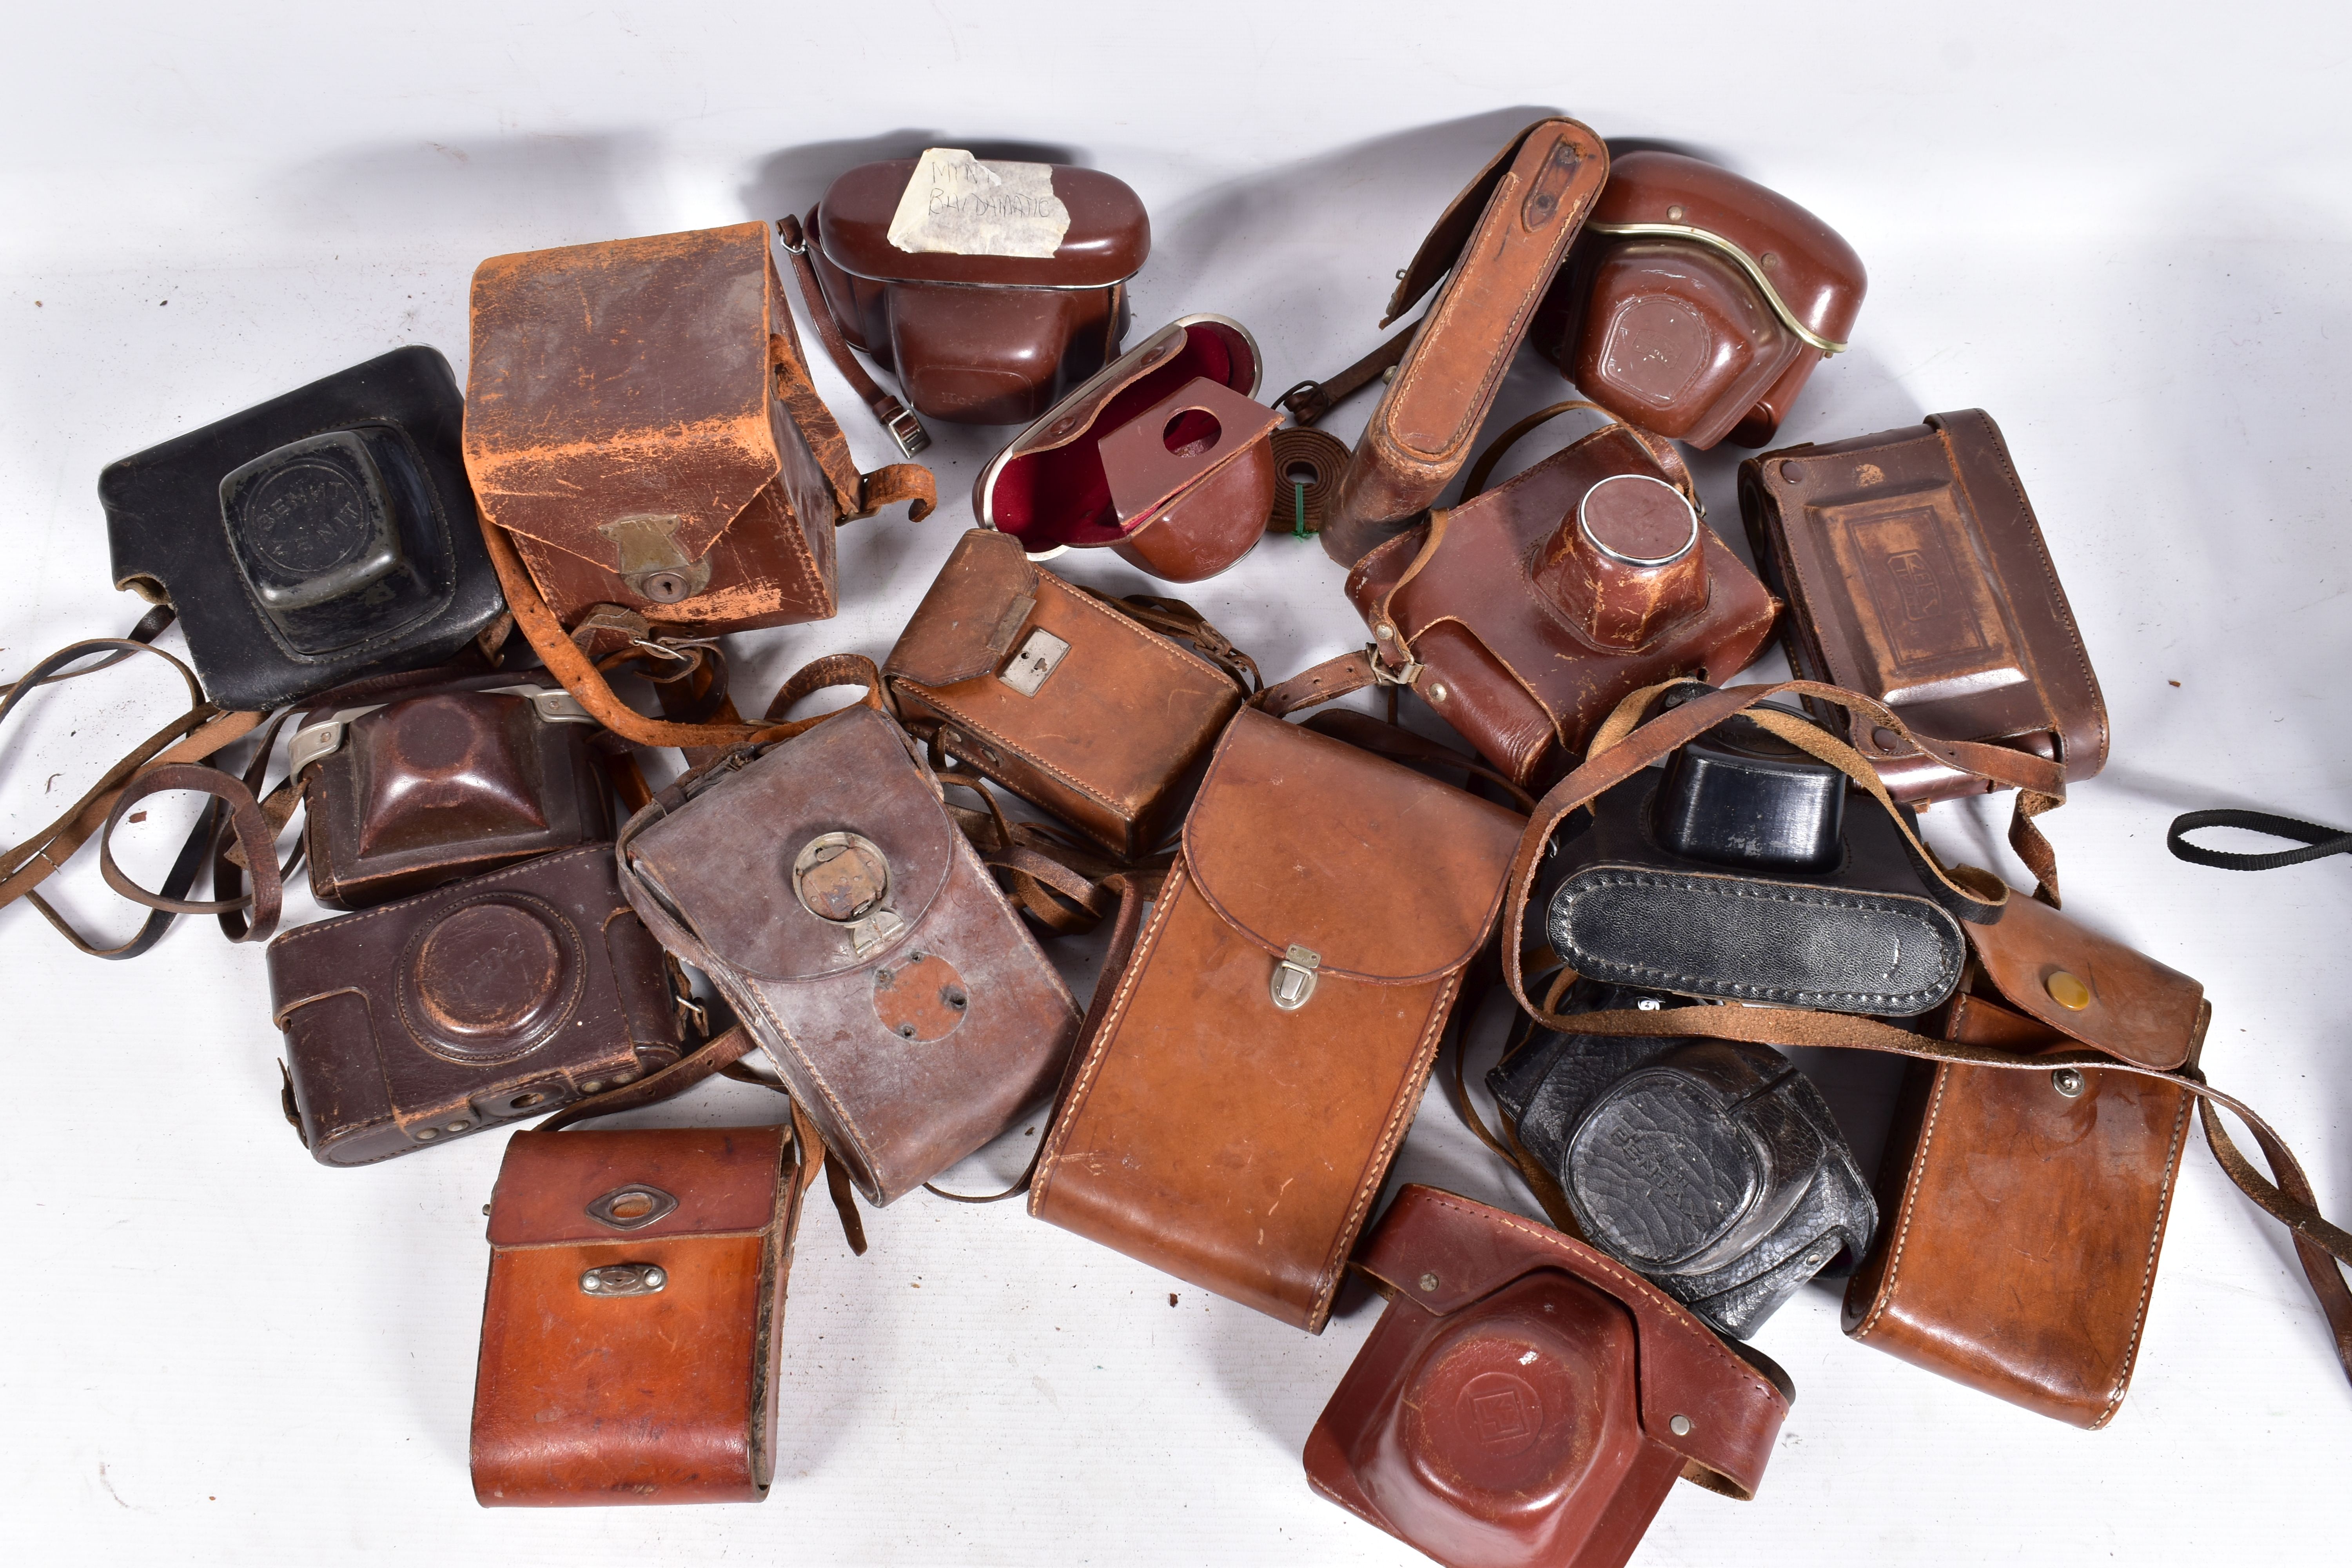 A TRAY CONTAINING A QUANTITY OF LEATHER CAMERA CASES by Zeiss Ikon, FED, Zorki, Braun, etc